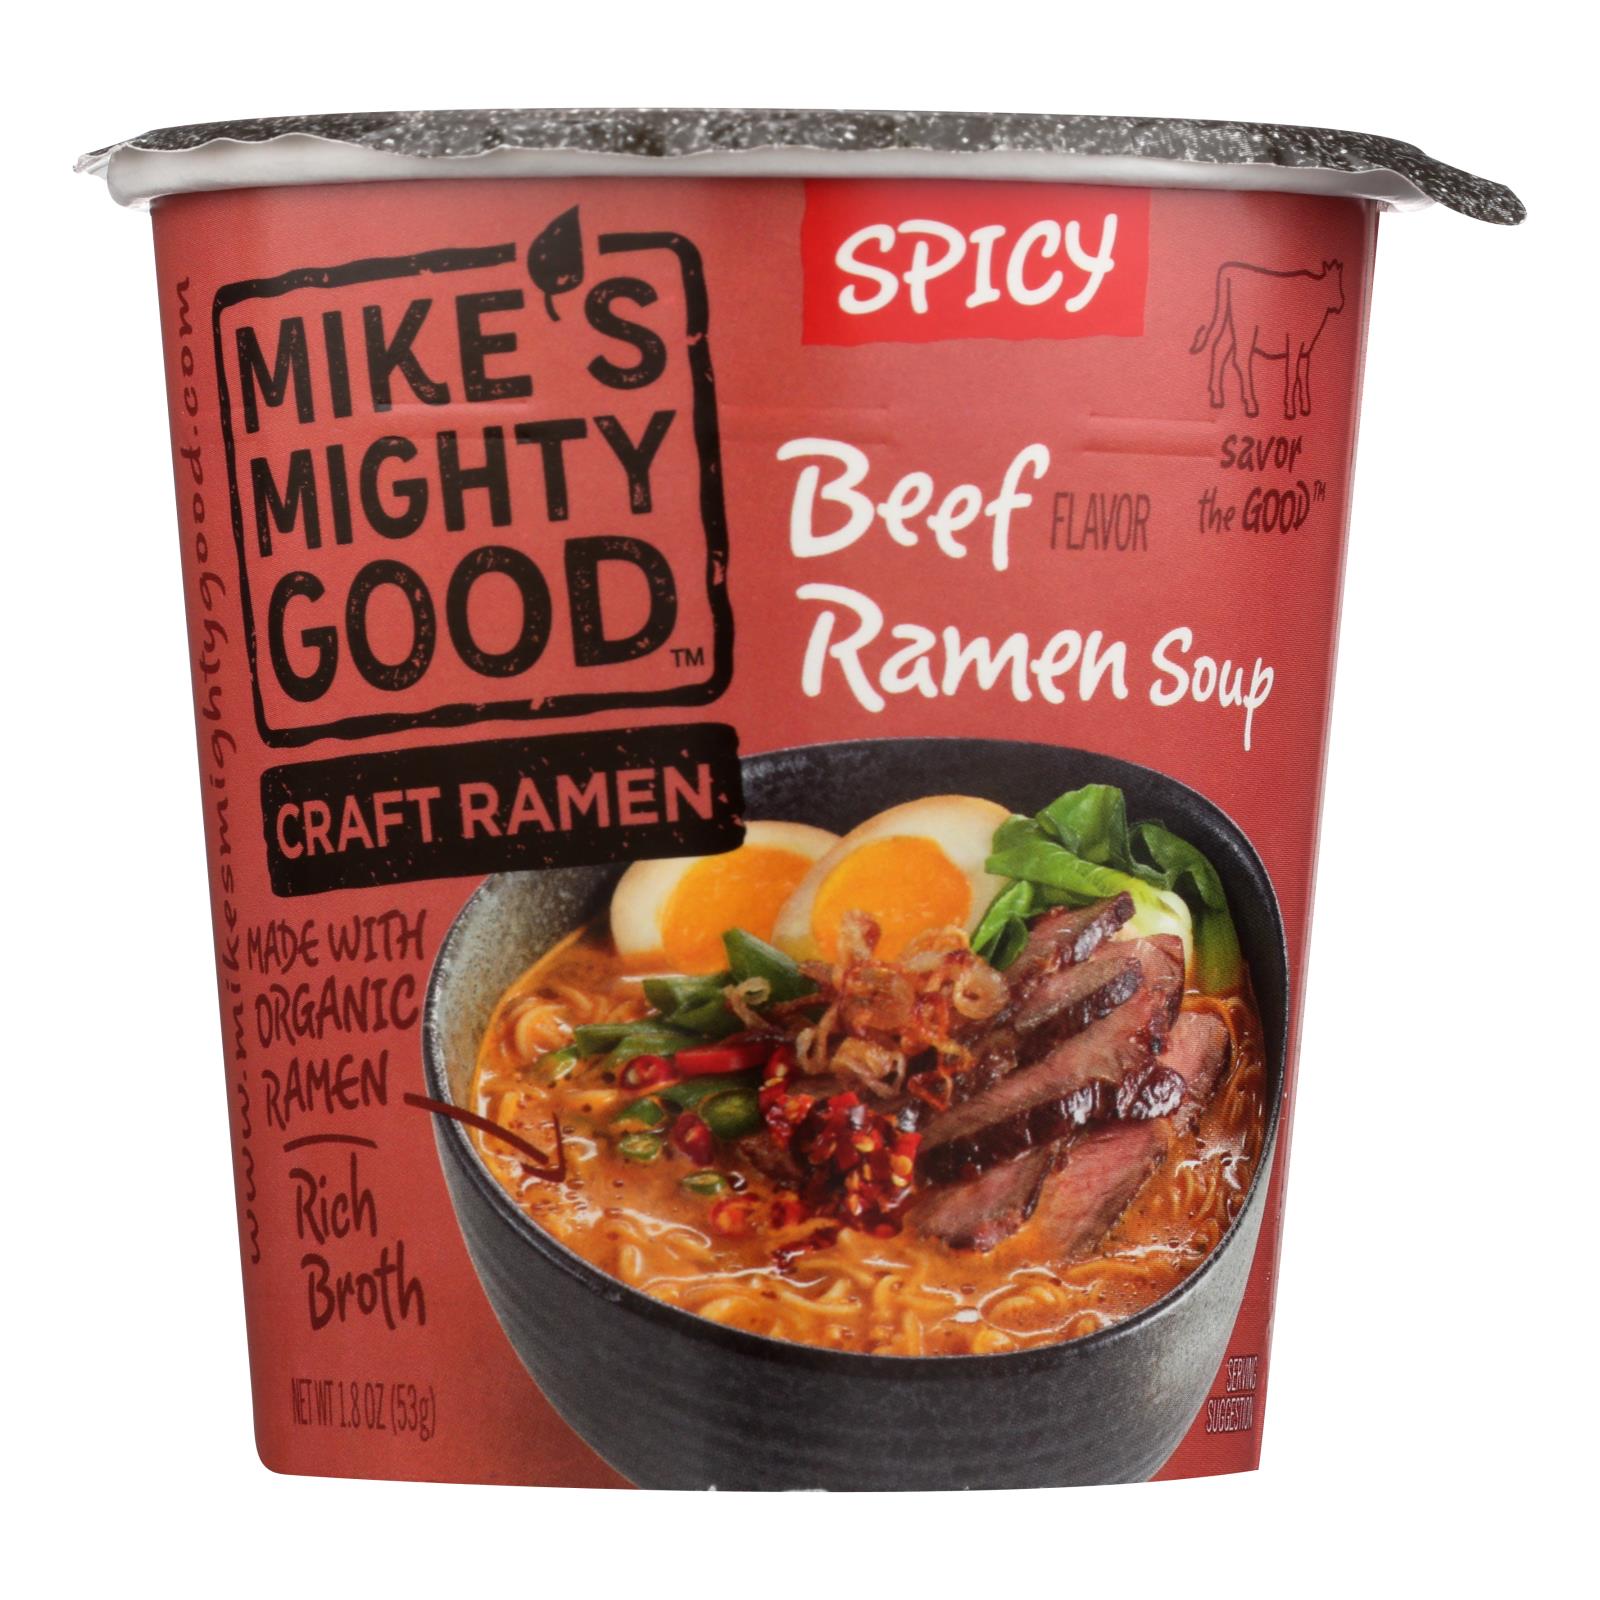 Mike's Mighty Good Spicy Beef Ramen Soup - 6개 묶음상품 - 1.8 OZ